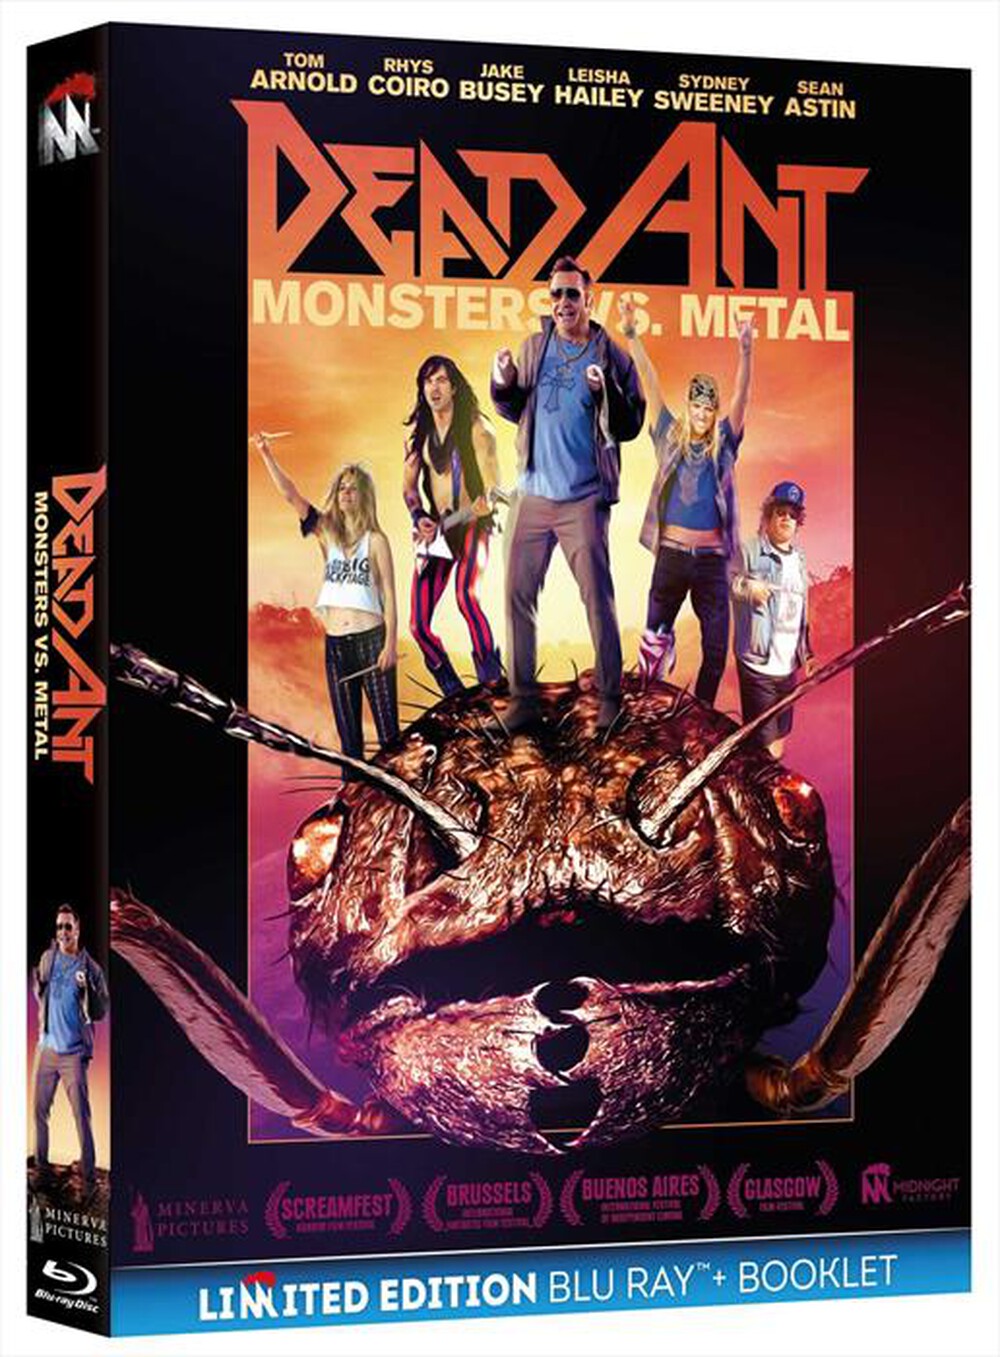 "Midnight Factory - Dead Ant - Monsters Vs. Metal (Blu-Ray+Booklet)"